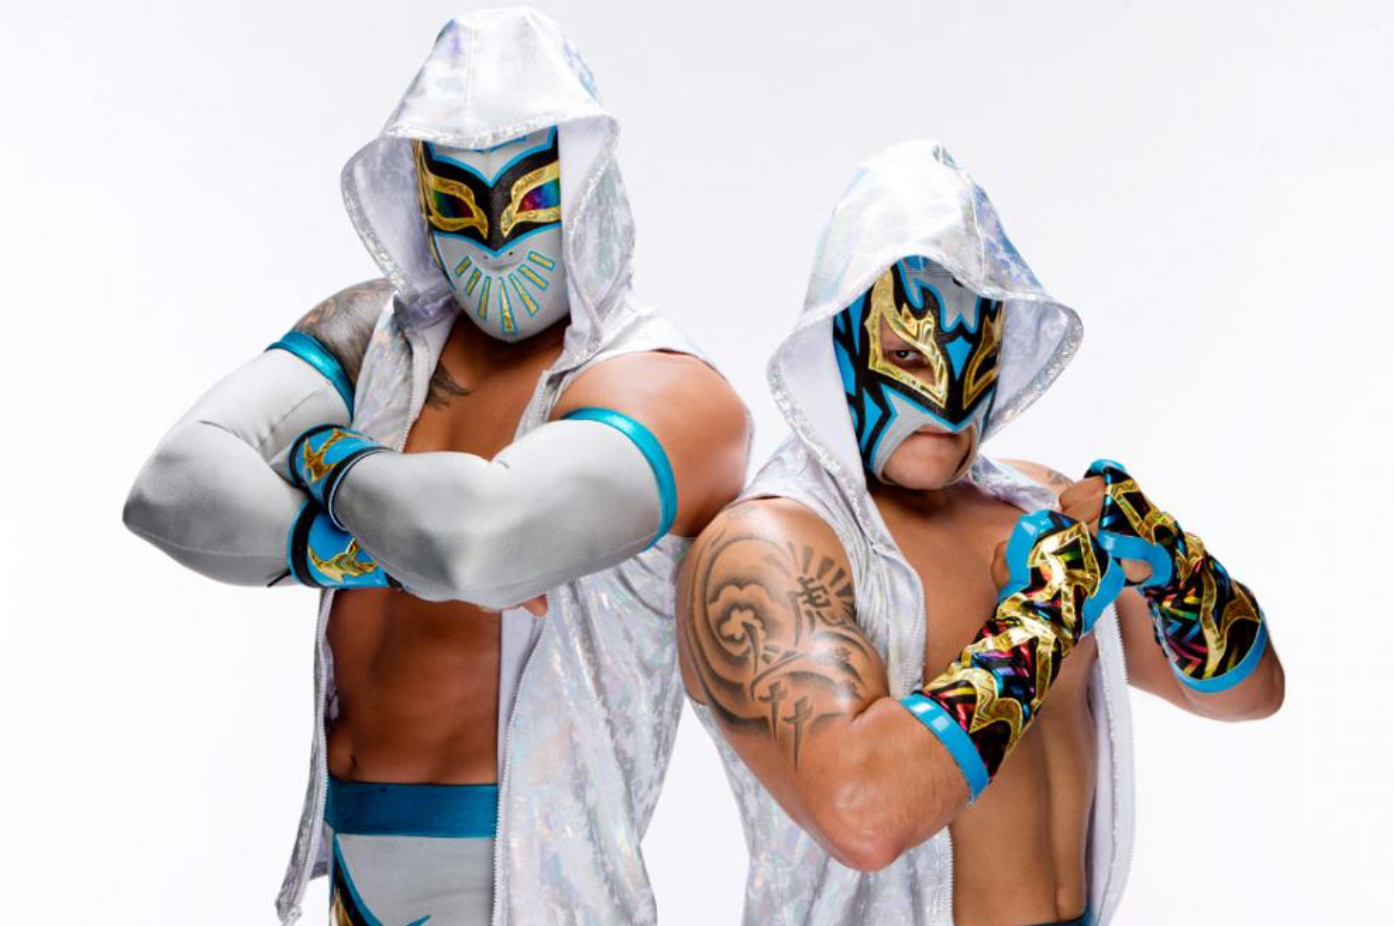 WWE.com presents a photo gallery of classic masked tag teams